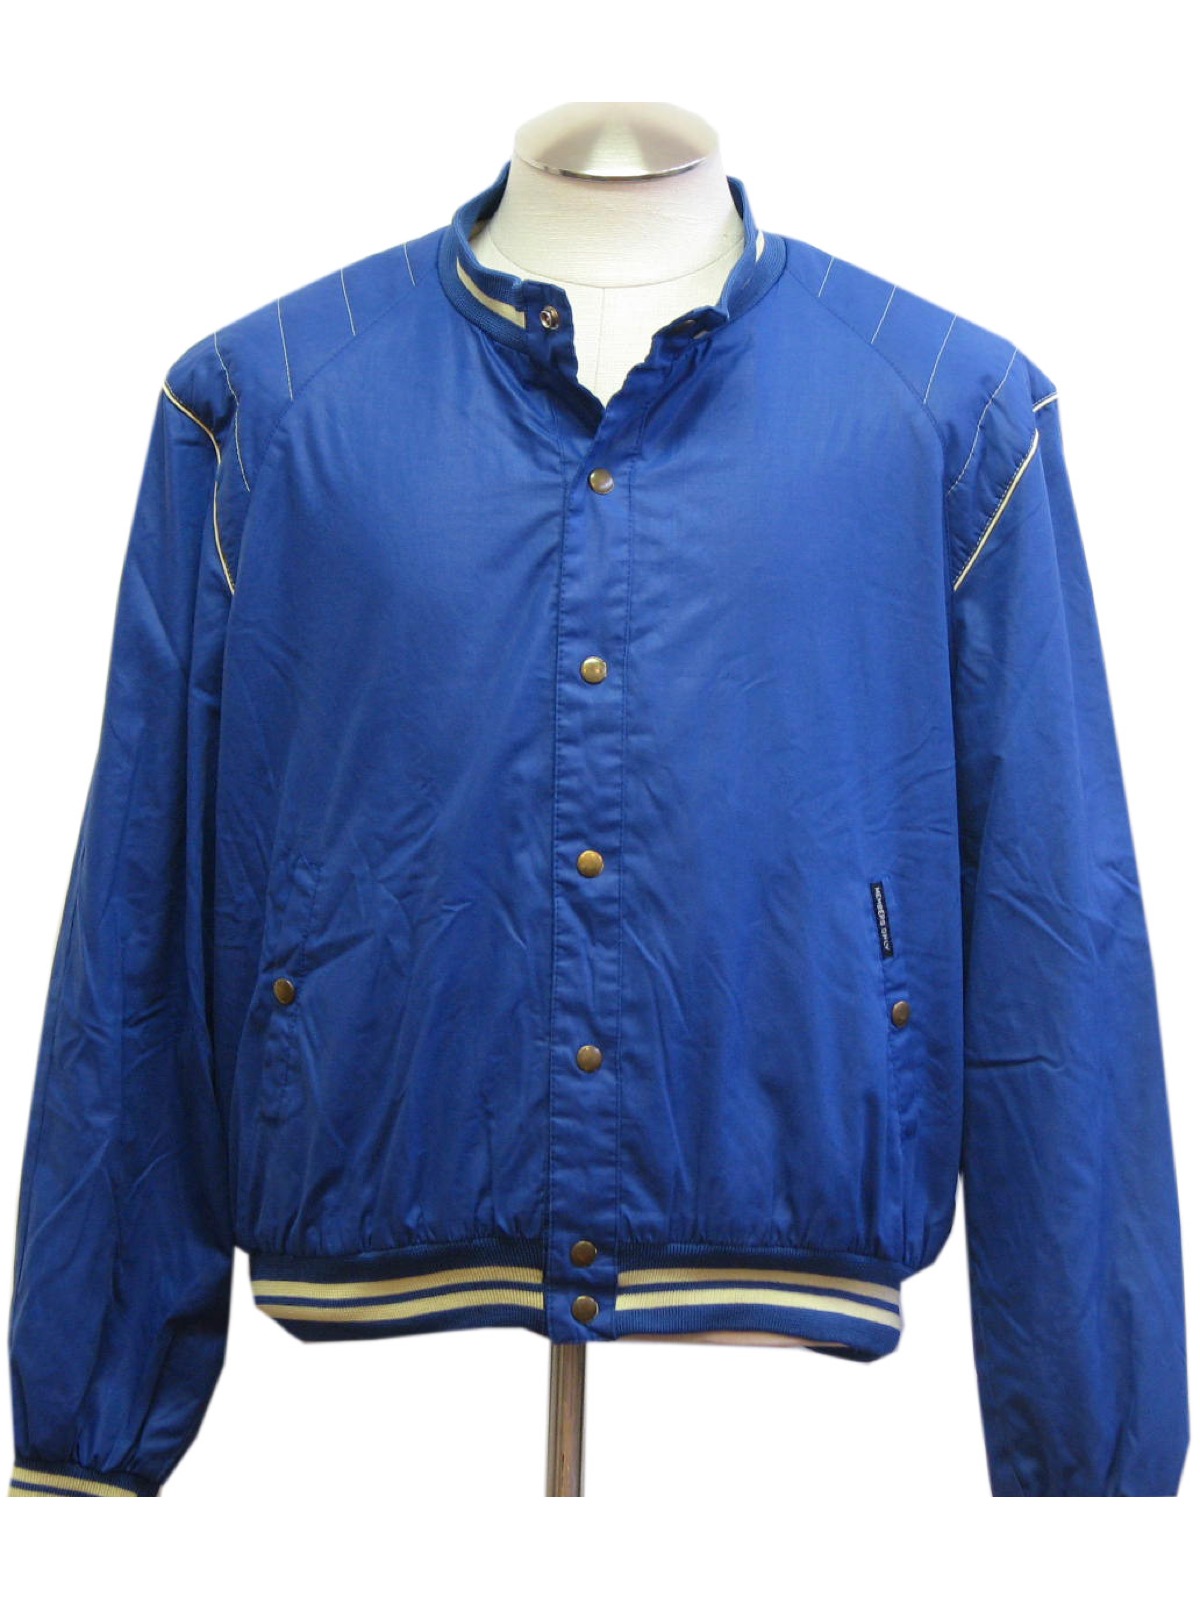 80s Retro Jacket: 80s -MEMBERS ONLY- Mens blue with white seam ...